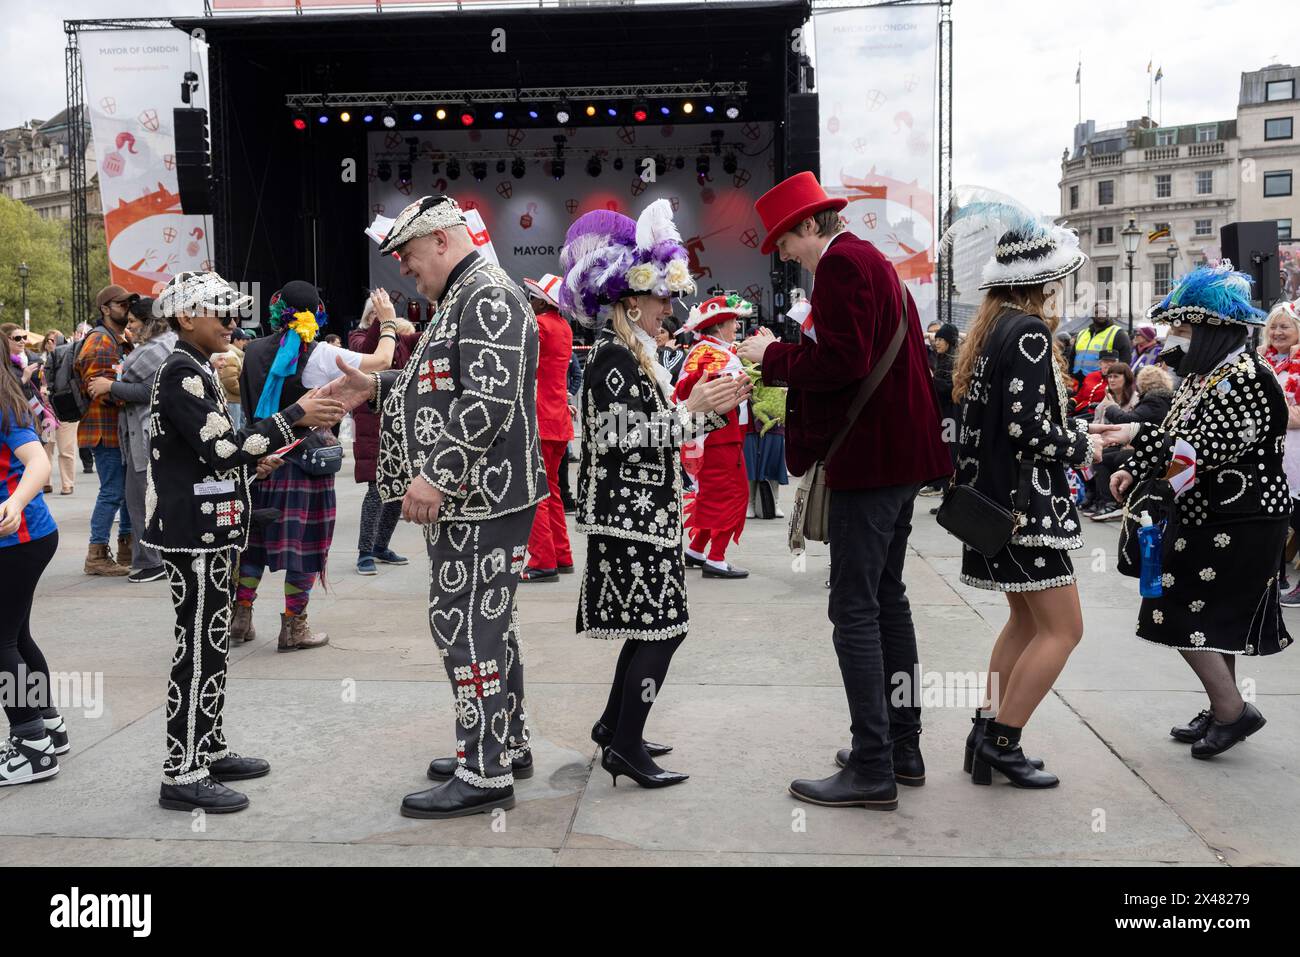 The Feast of St. George Festival in Trafalgar Square, April 23rd 2024 including Pearly Kings and Queens to celebrate celebrate Patron Saint of England. Stock Photo